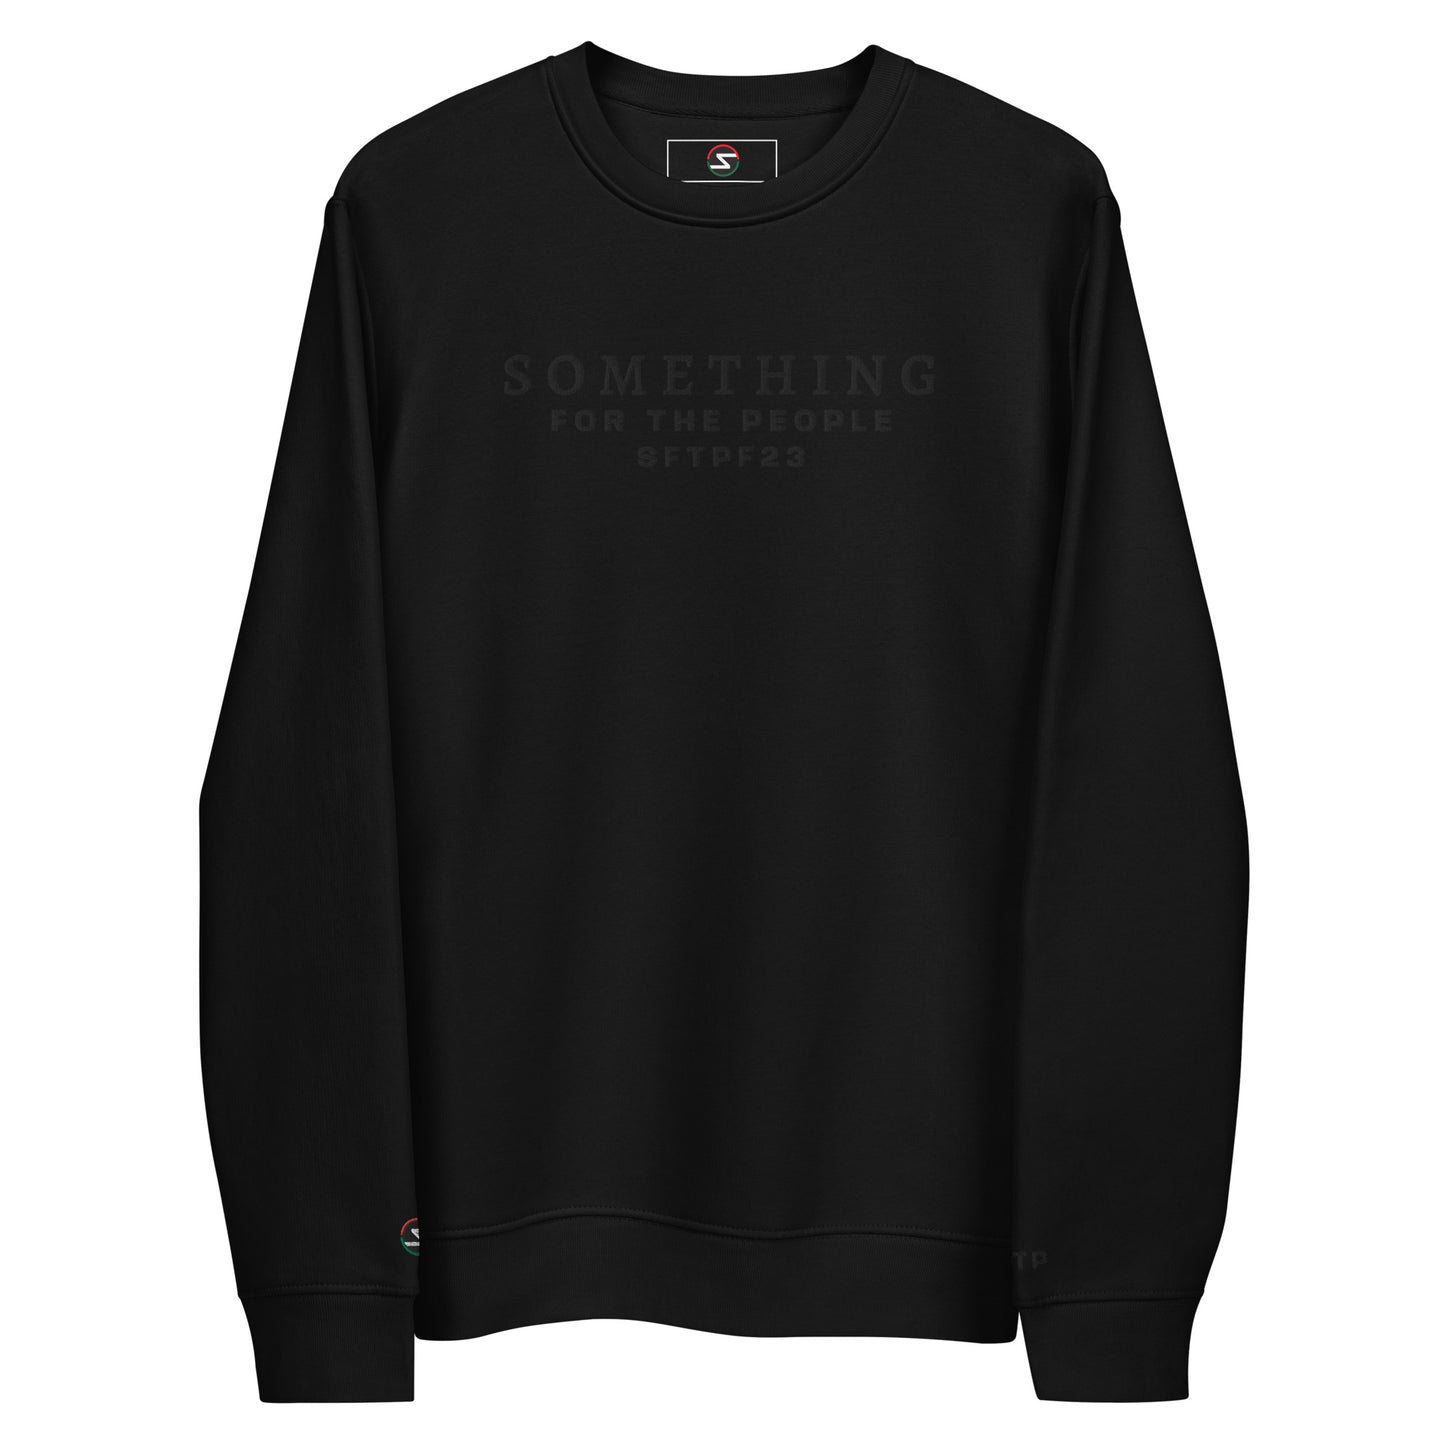 HOLD OUT FOR THE GREATER GOOD UNISEX SWEATSHIRT